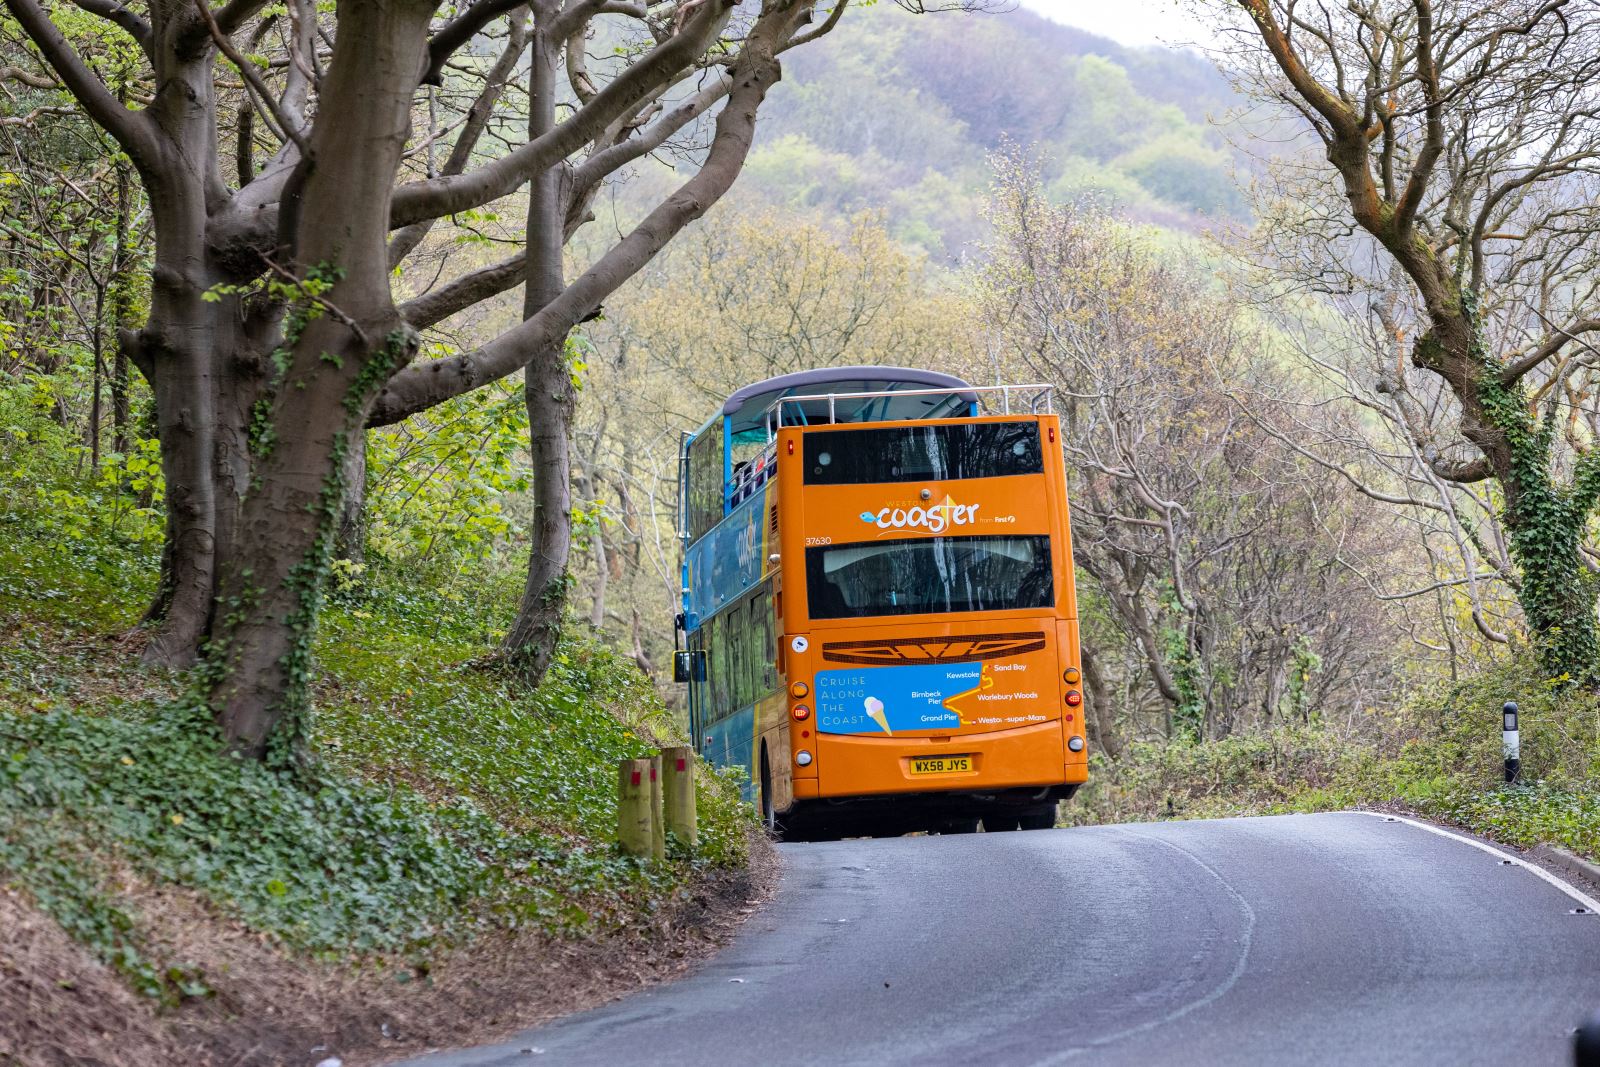 An open top bus on a road through woodland